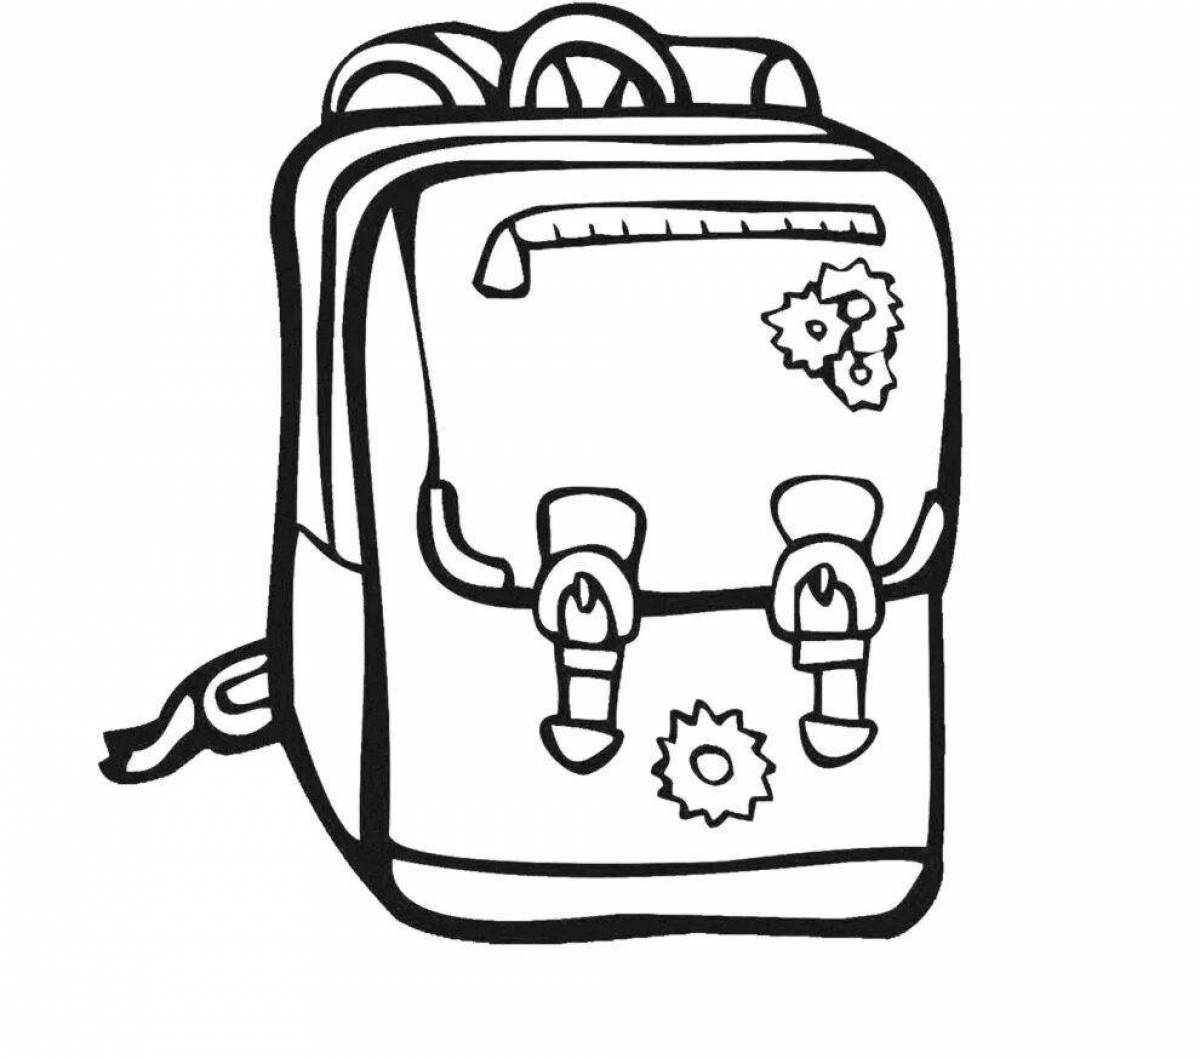 Colorful - amazing backpack coloring book for kids